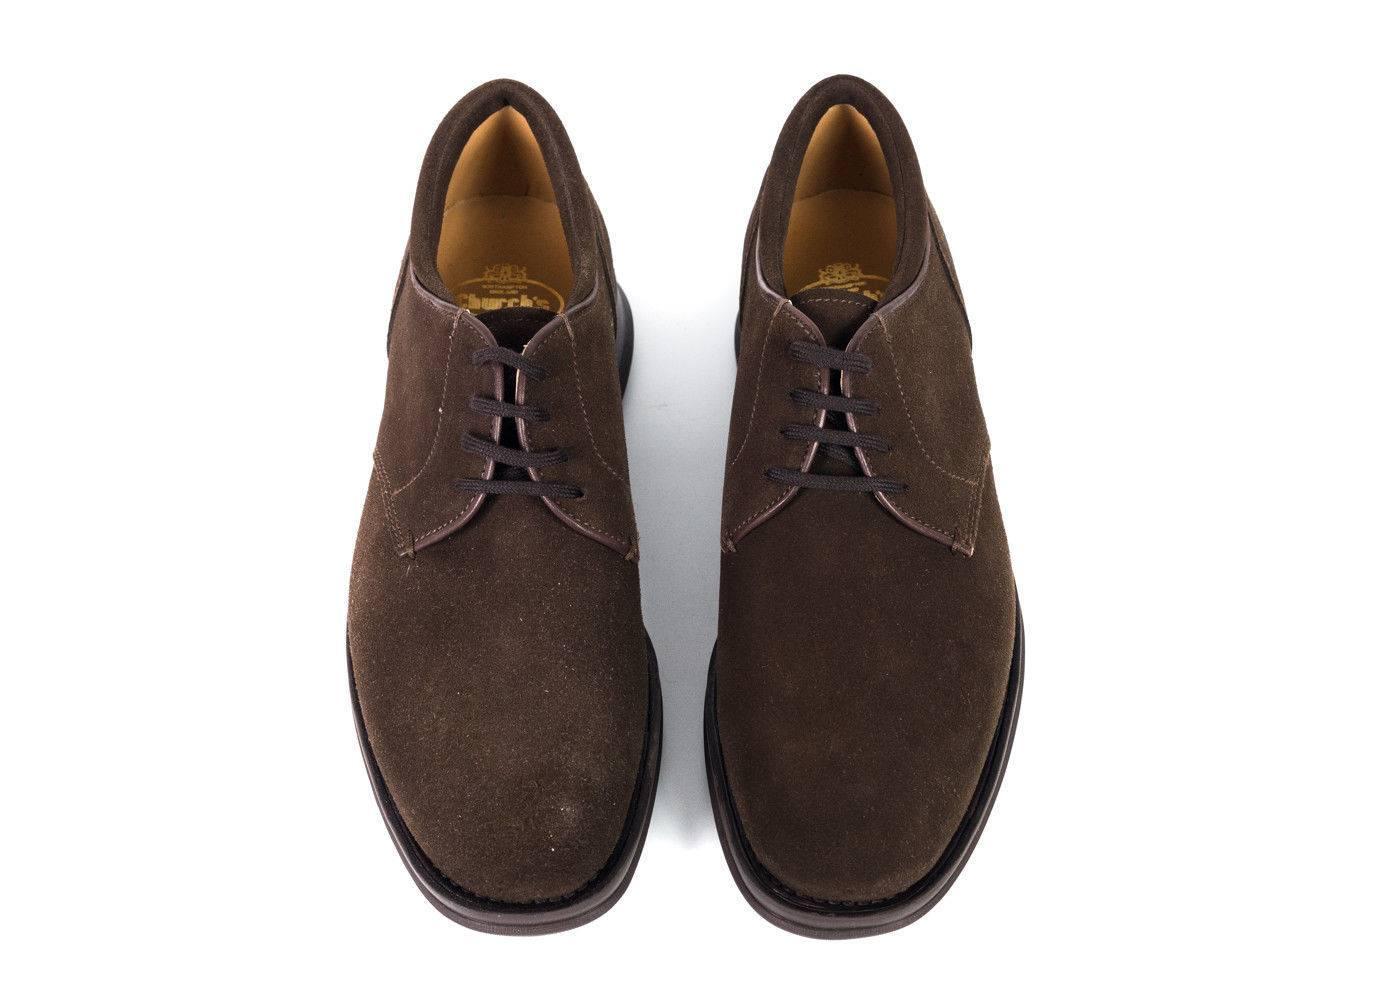 Men's Church's Women's Dark Brown Suede Lace-Up Charmain Shoes For Sale